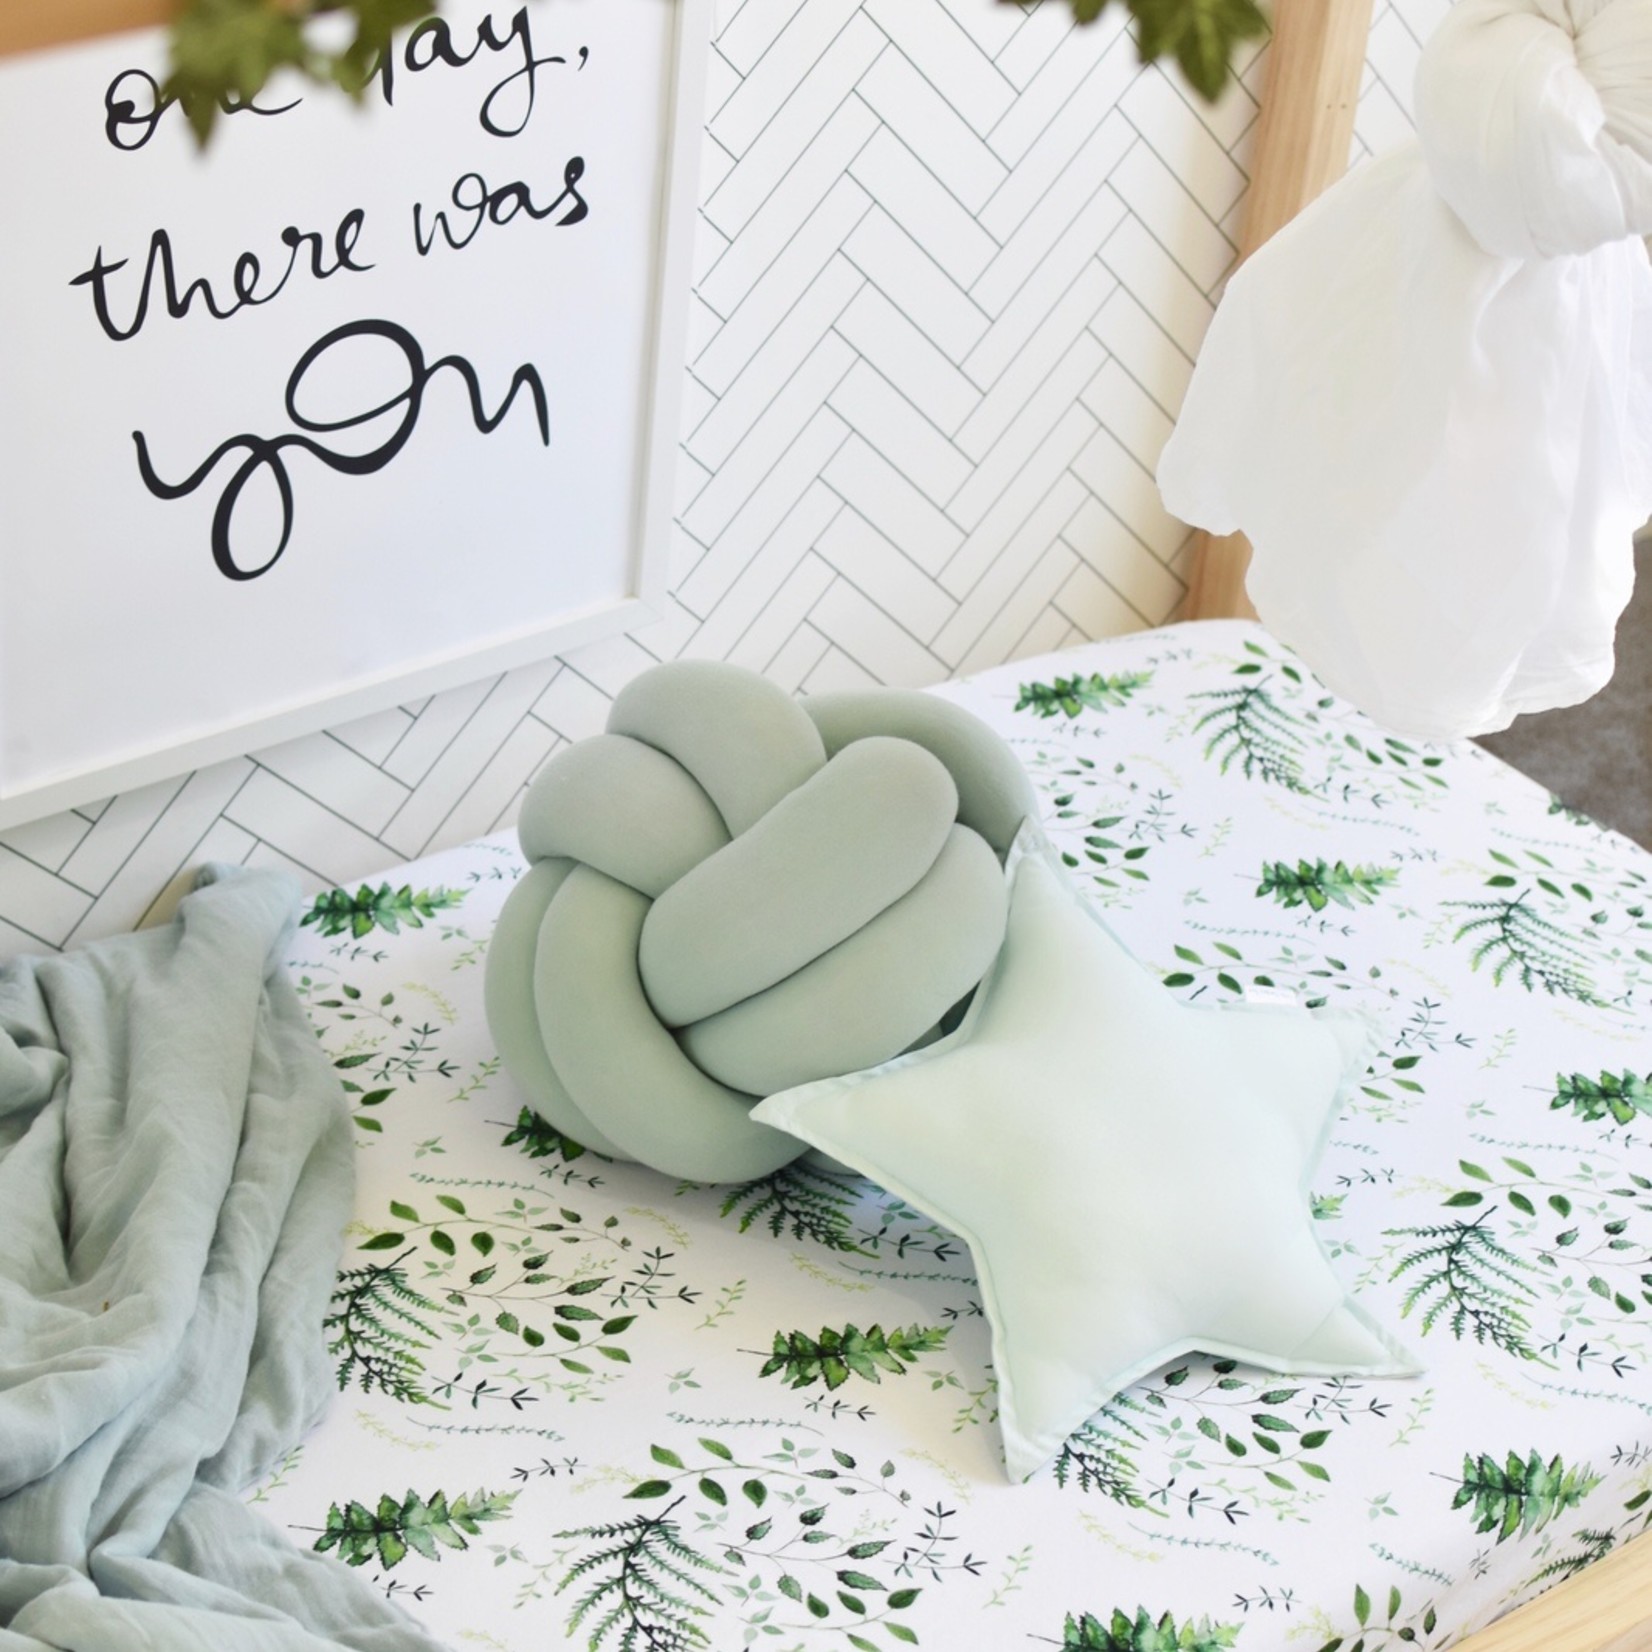 Snuggle Hunny Fitted Cot Sheet Enchanted